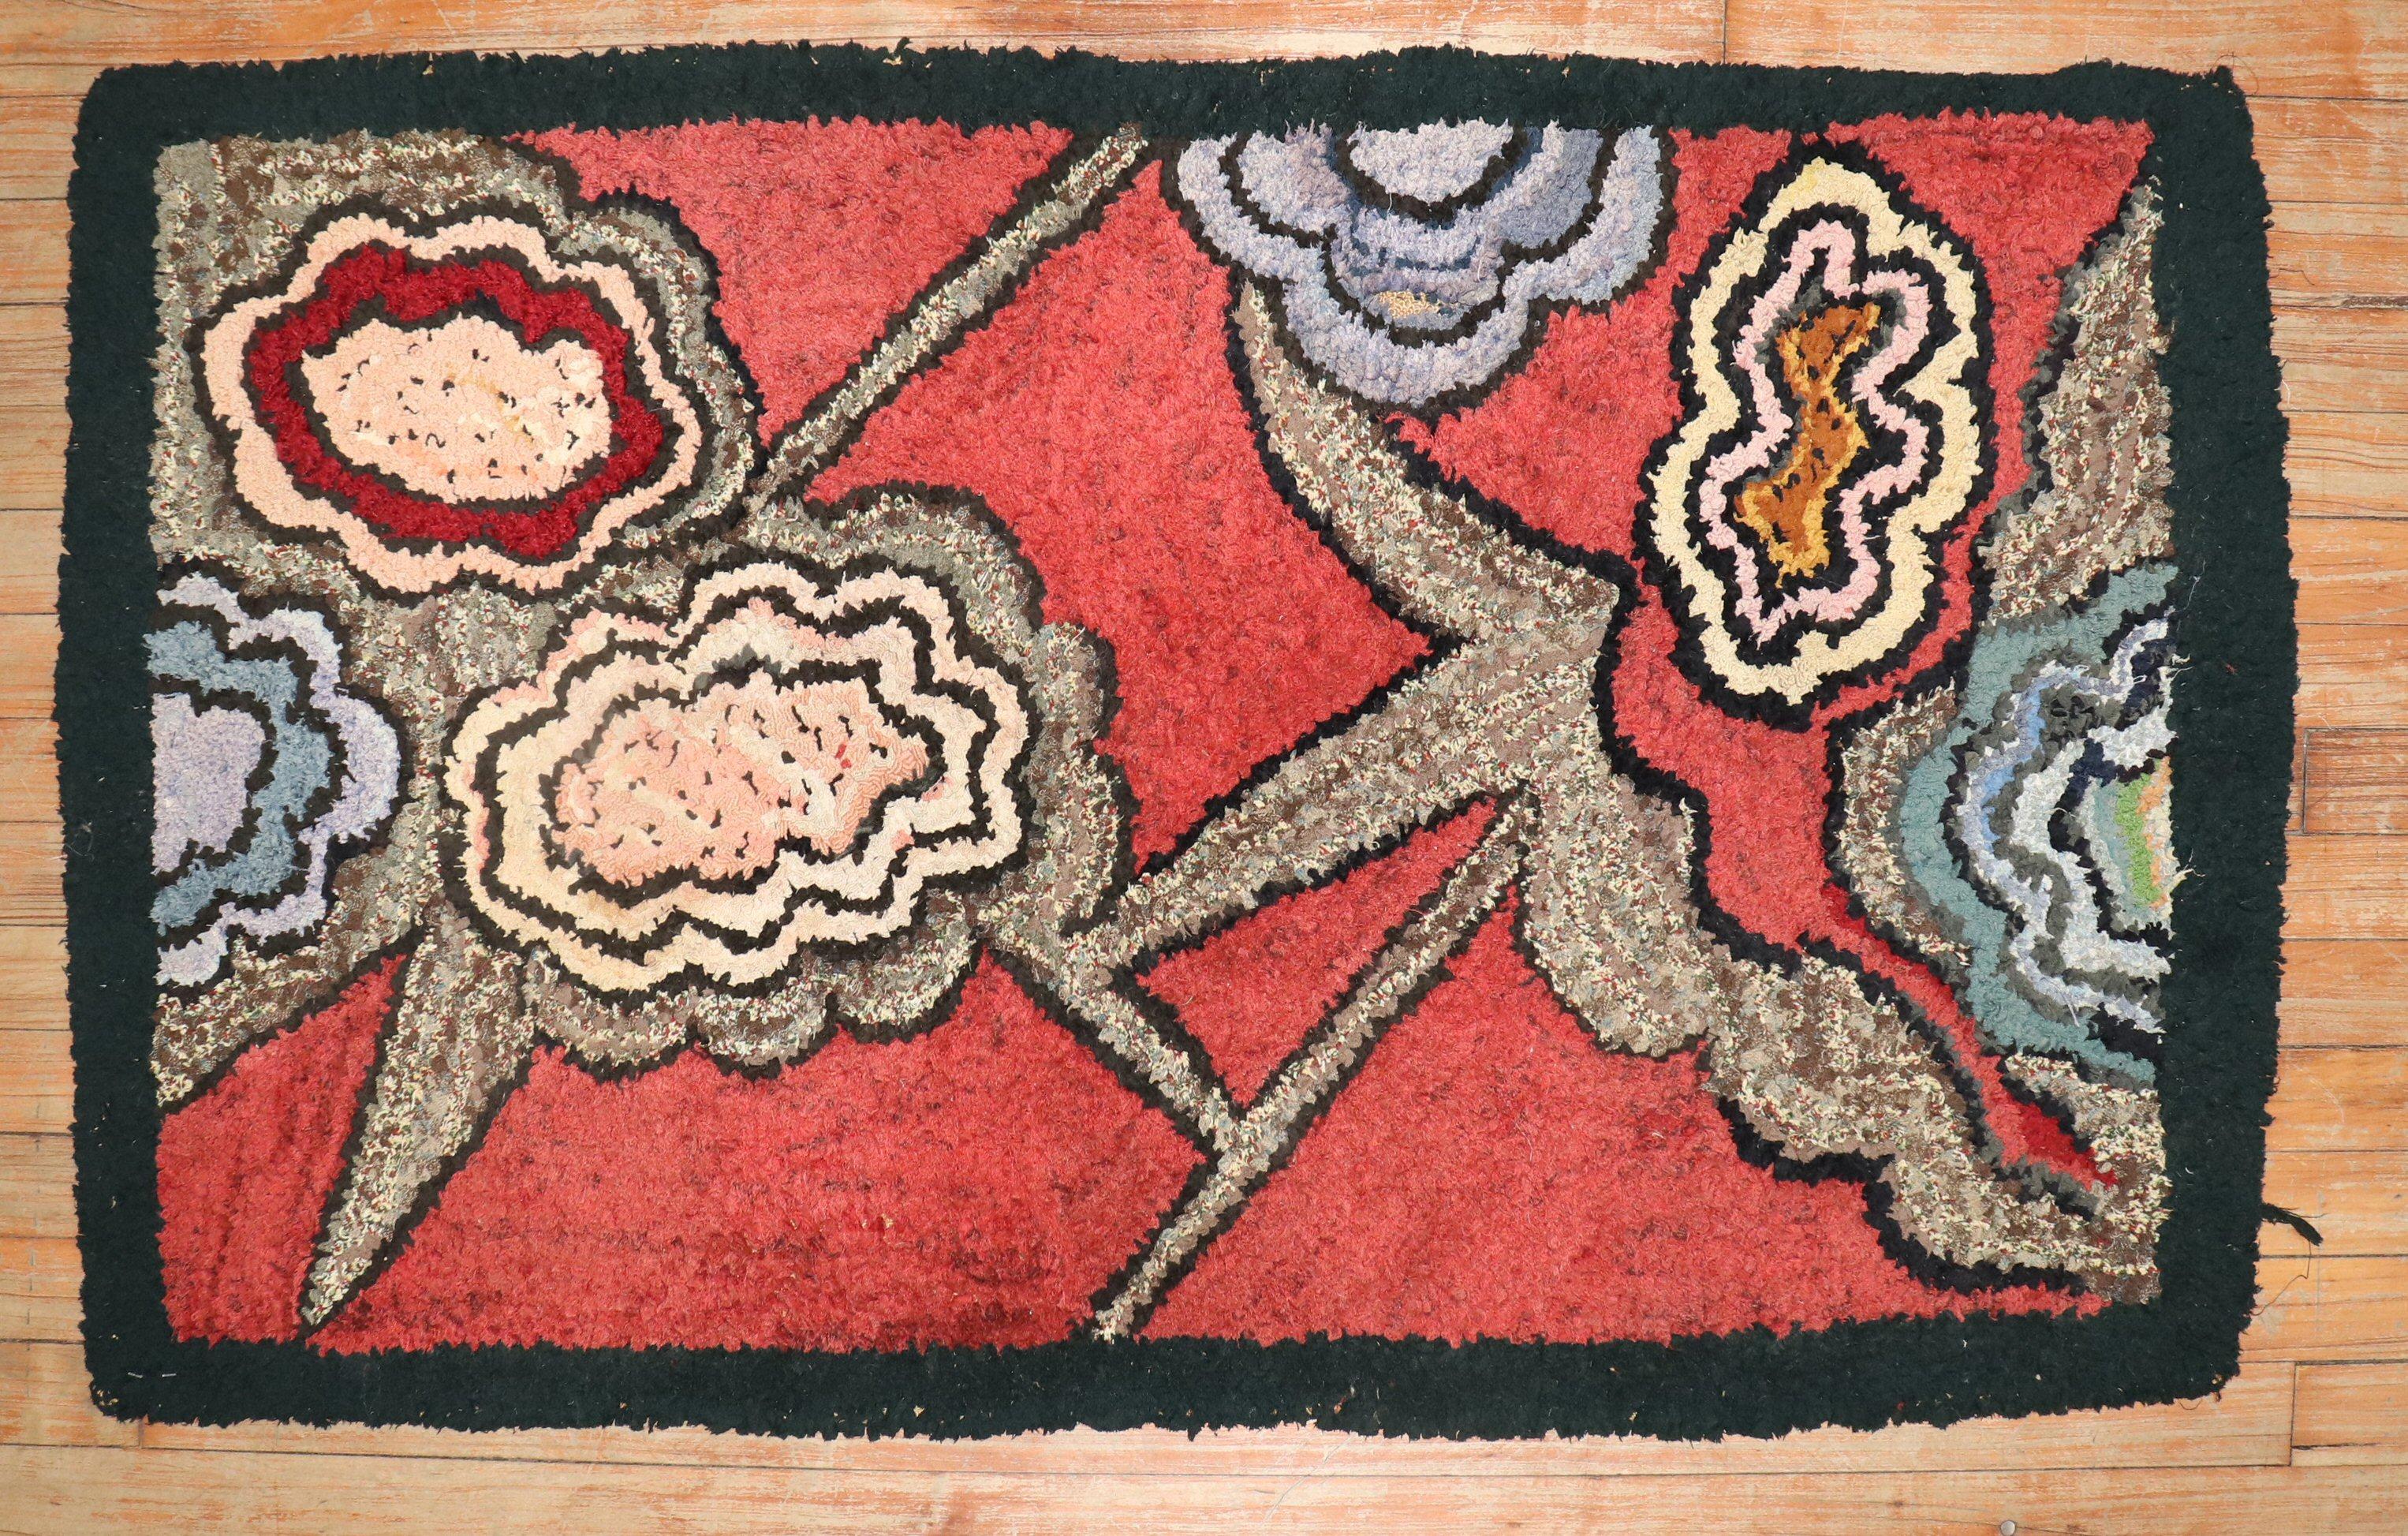 American hooked mat size rug from the middle of the 20th century

Measures: 2'5